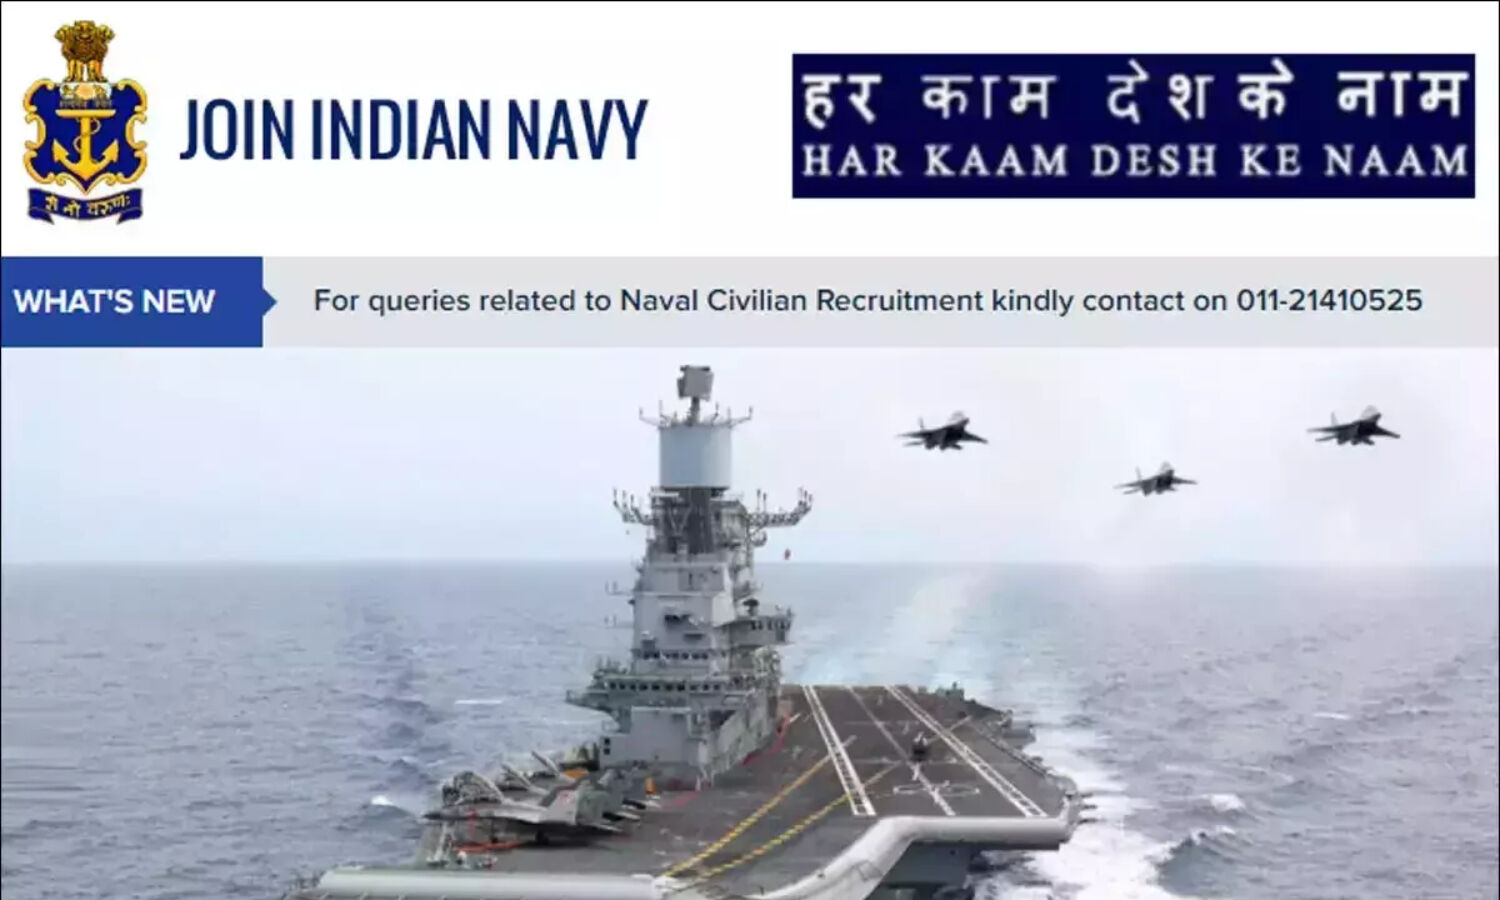 Indian Navy Recruitment 2022: Government jobs in Indian Navy, here are the application process